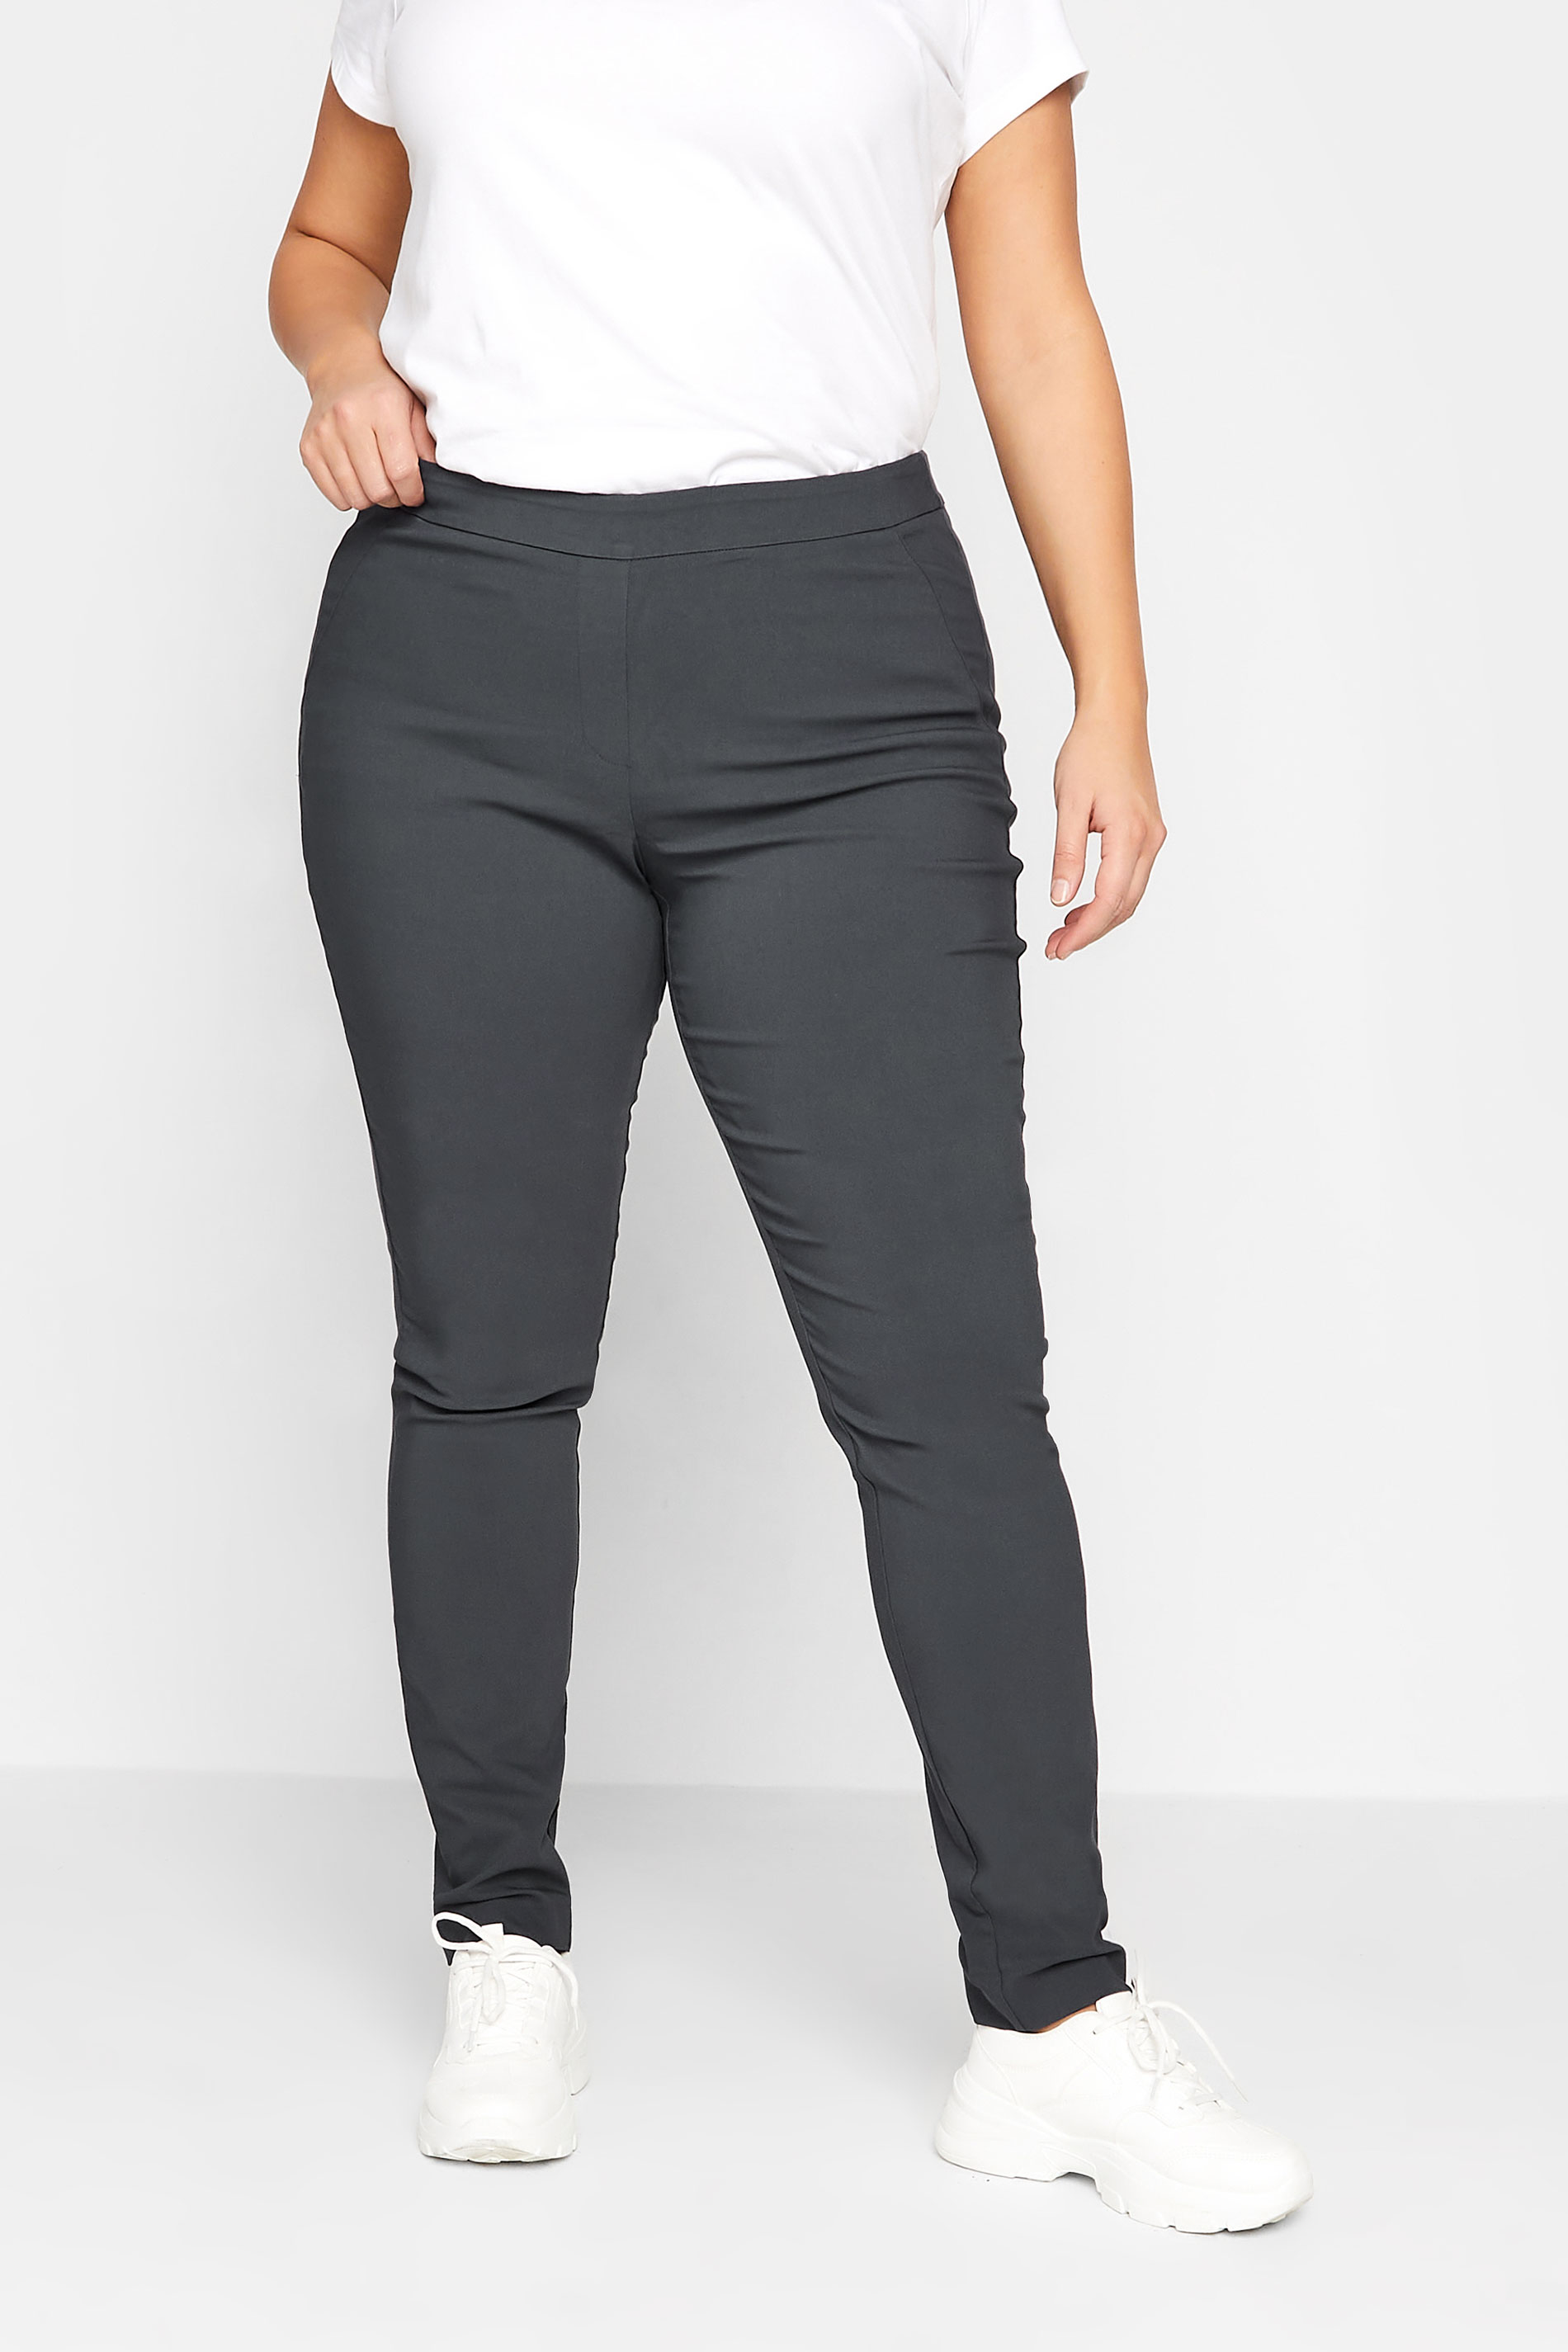 LTS Tall Women's Grey Skinny Fit Trousers | Long Tall Sally 1